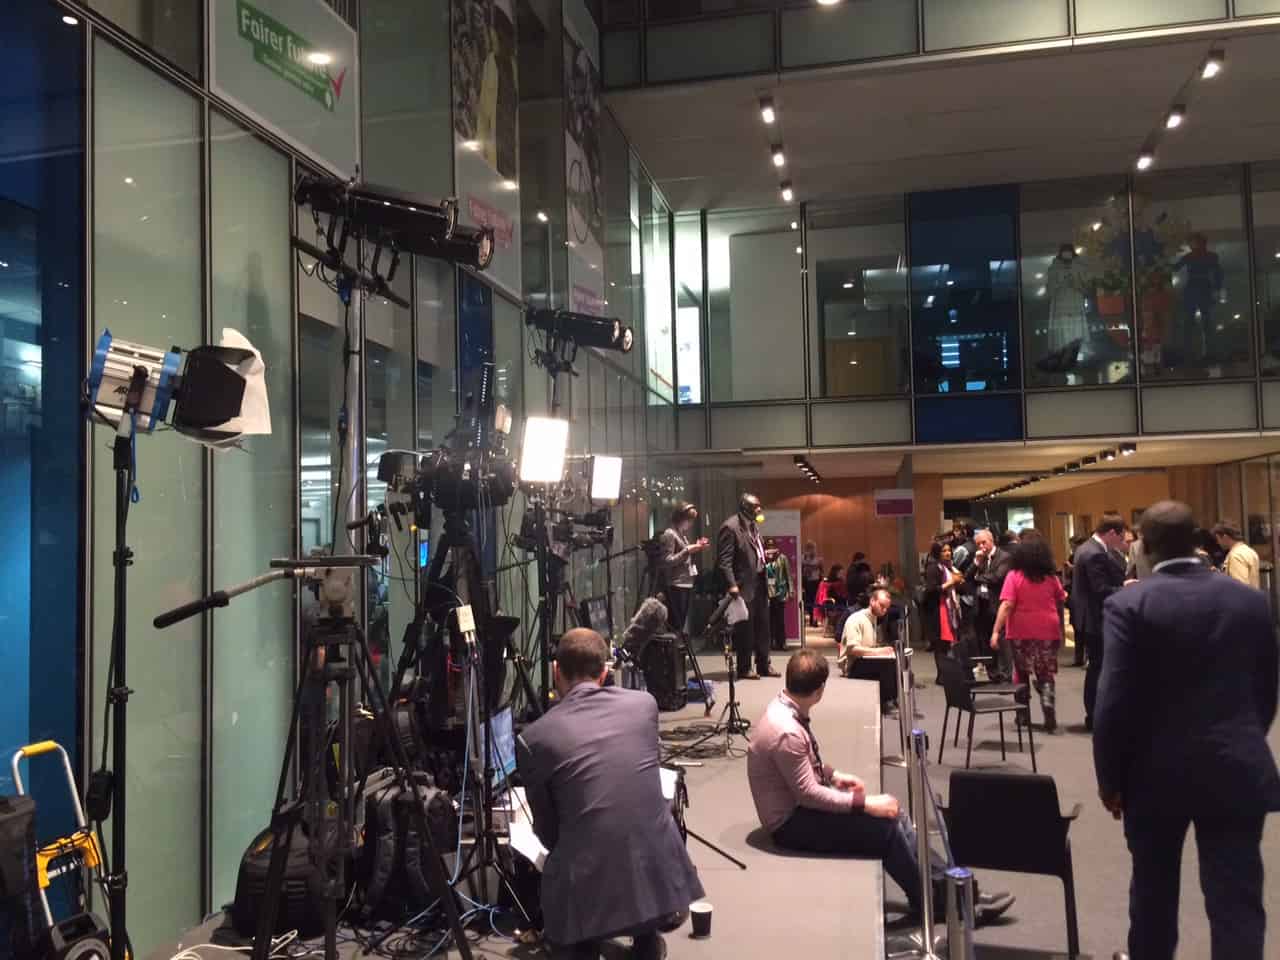 The scene at Southwark Council's Tooley Street headquarters